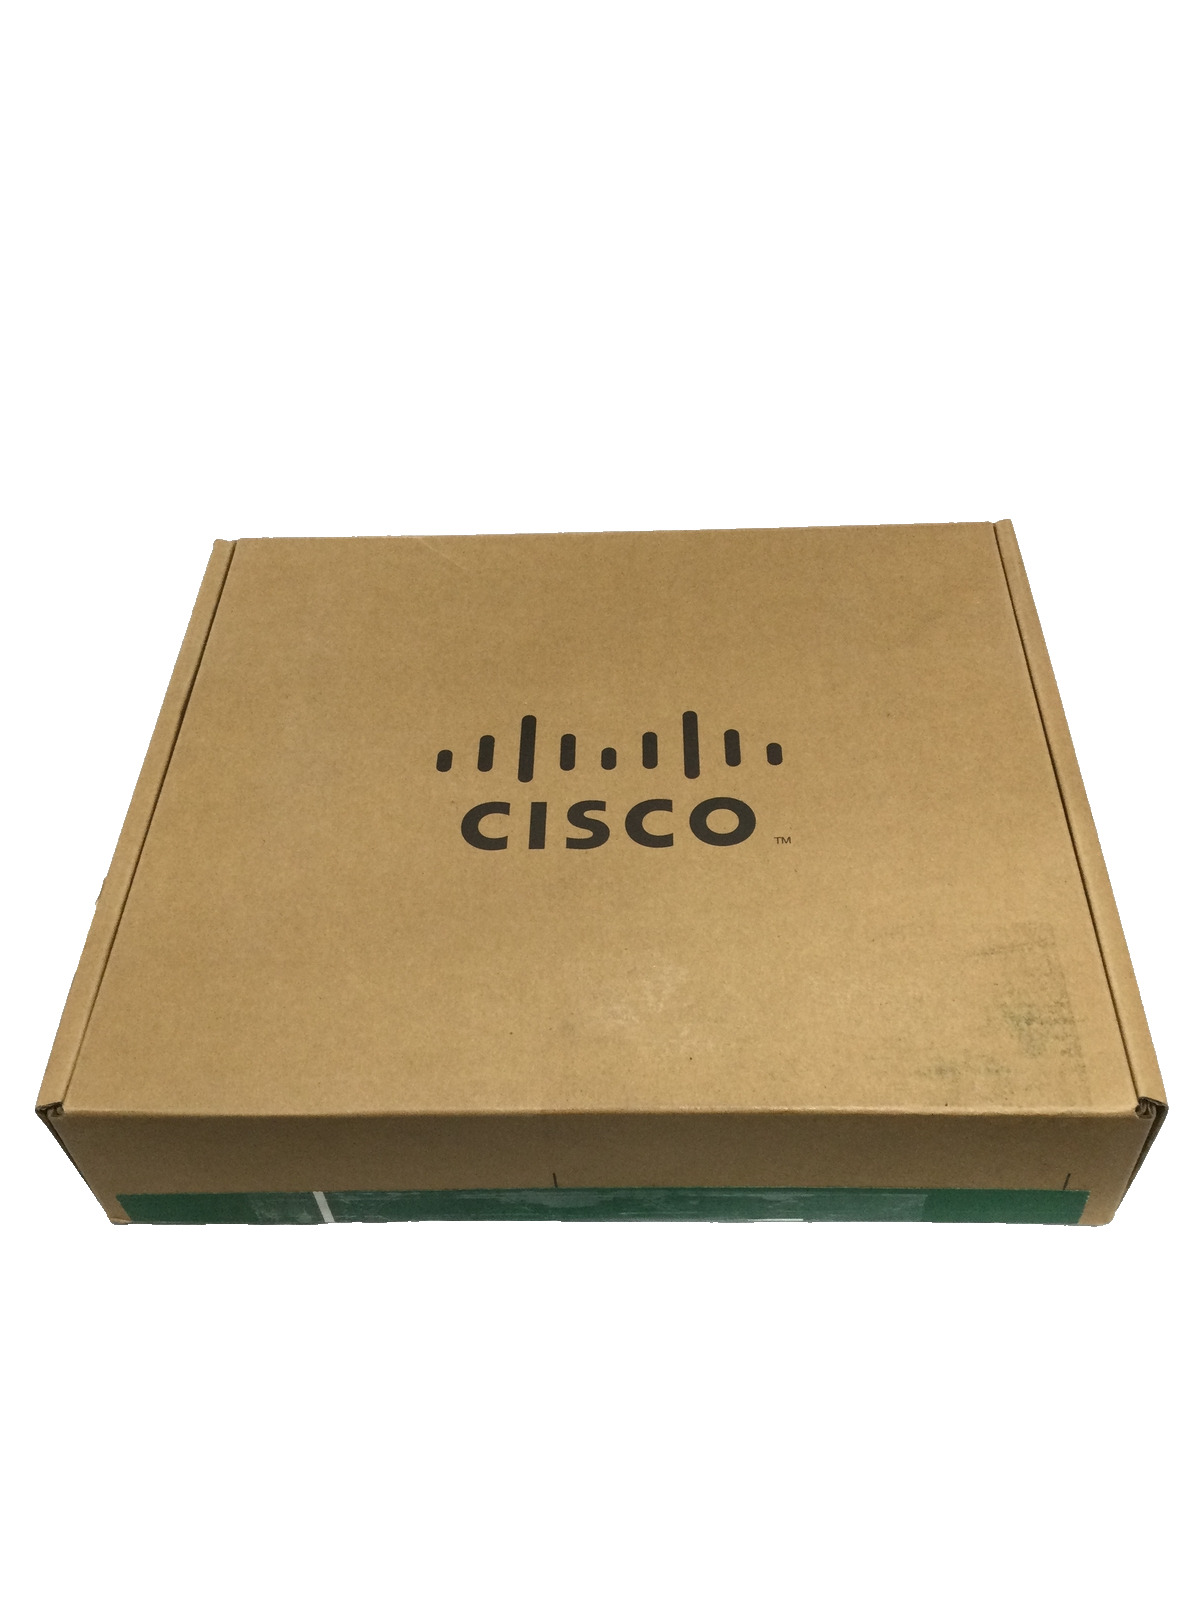 LIKE NEW Cisco SG110-16HP-NA-WS SG POE switch SG110-1Factory REF IN ORIGINAL BOX